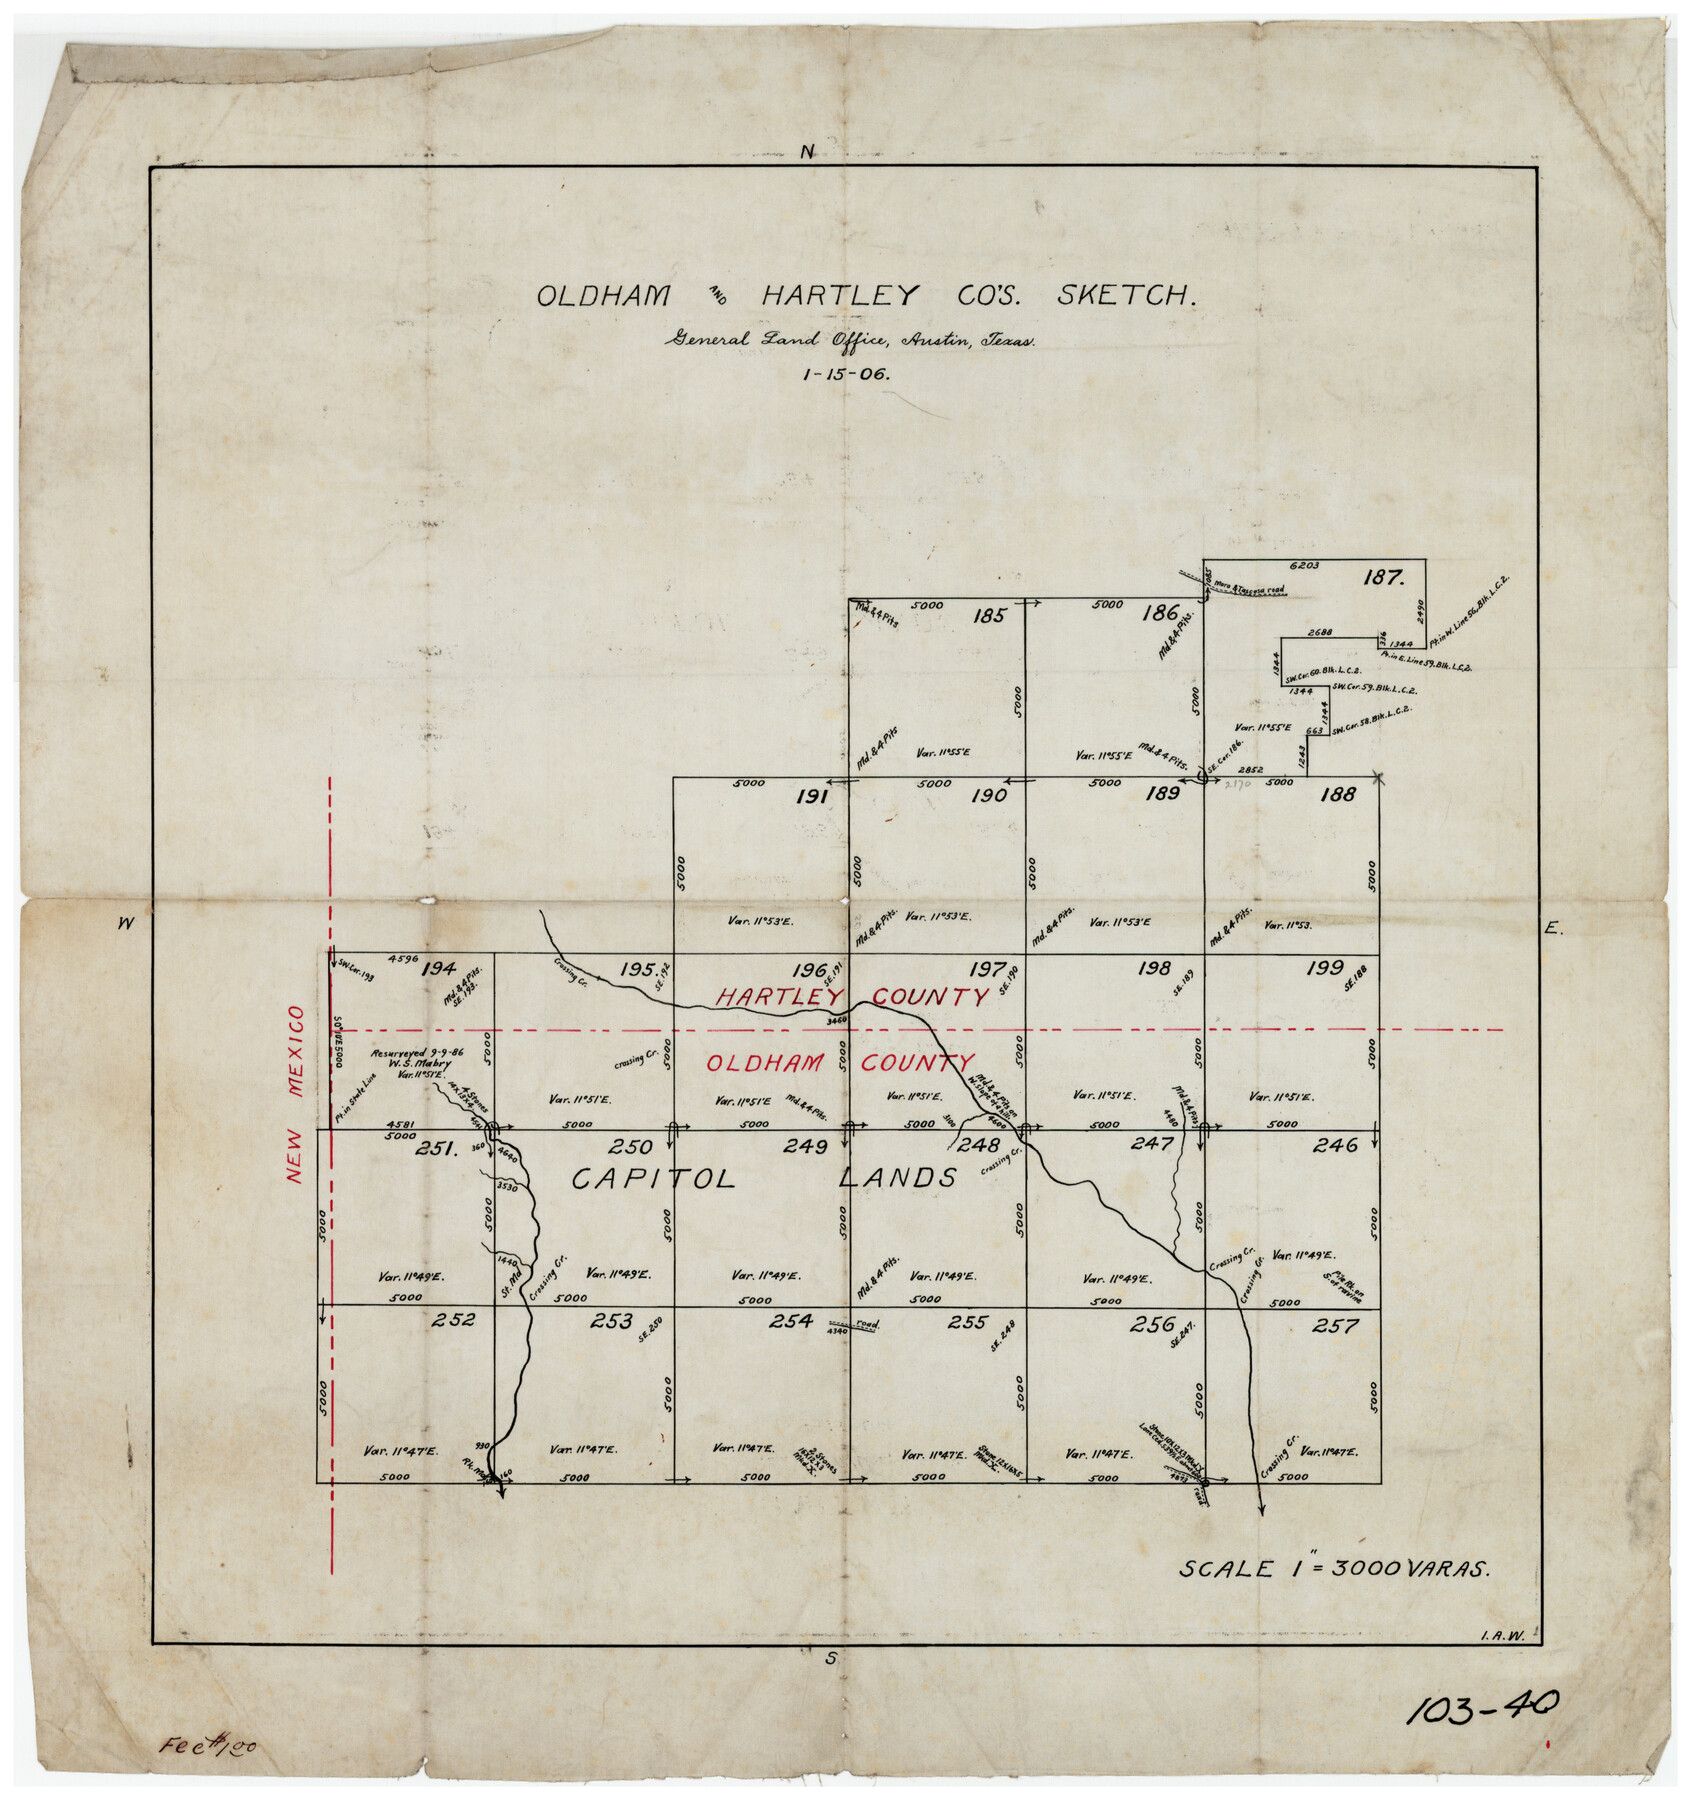 90671, Oldham and Hartley Counties Sketch, Twichell Survey Records